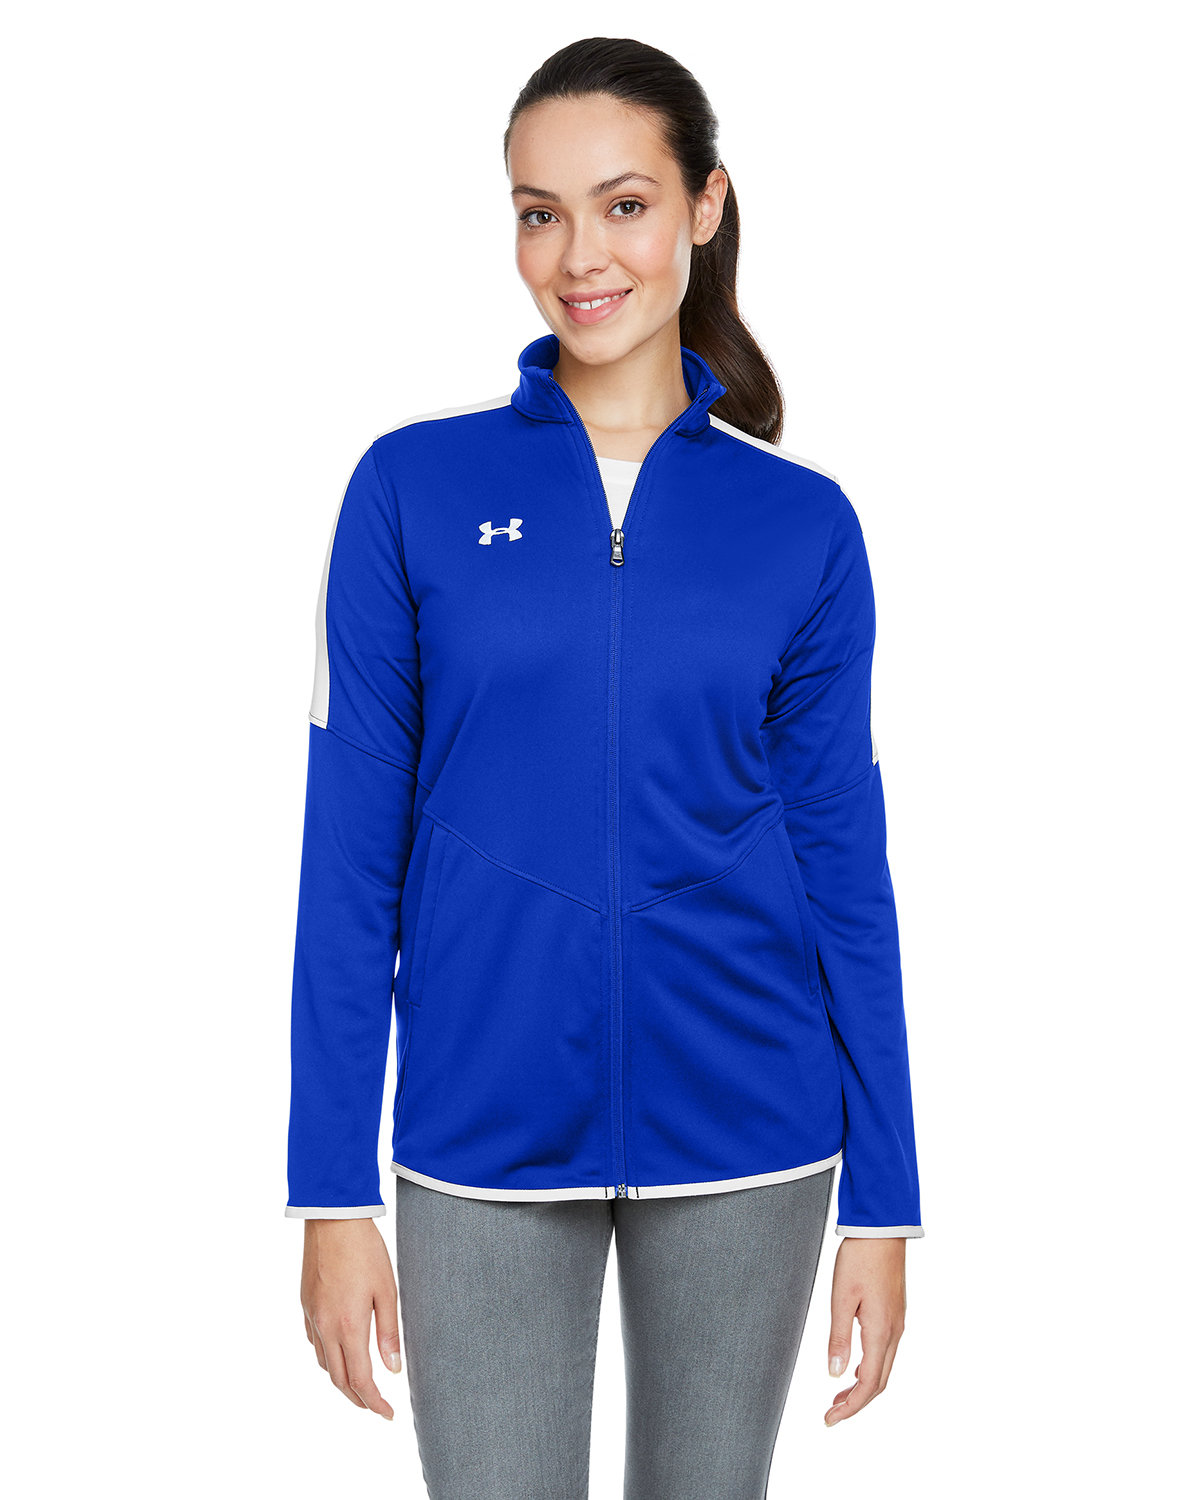 E007 1326774 Under Armour Ladies' Rival Knit Jacket